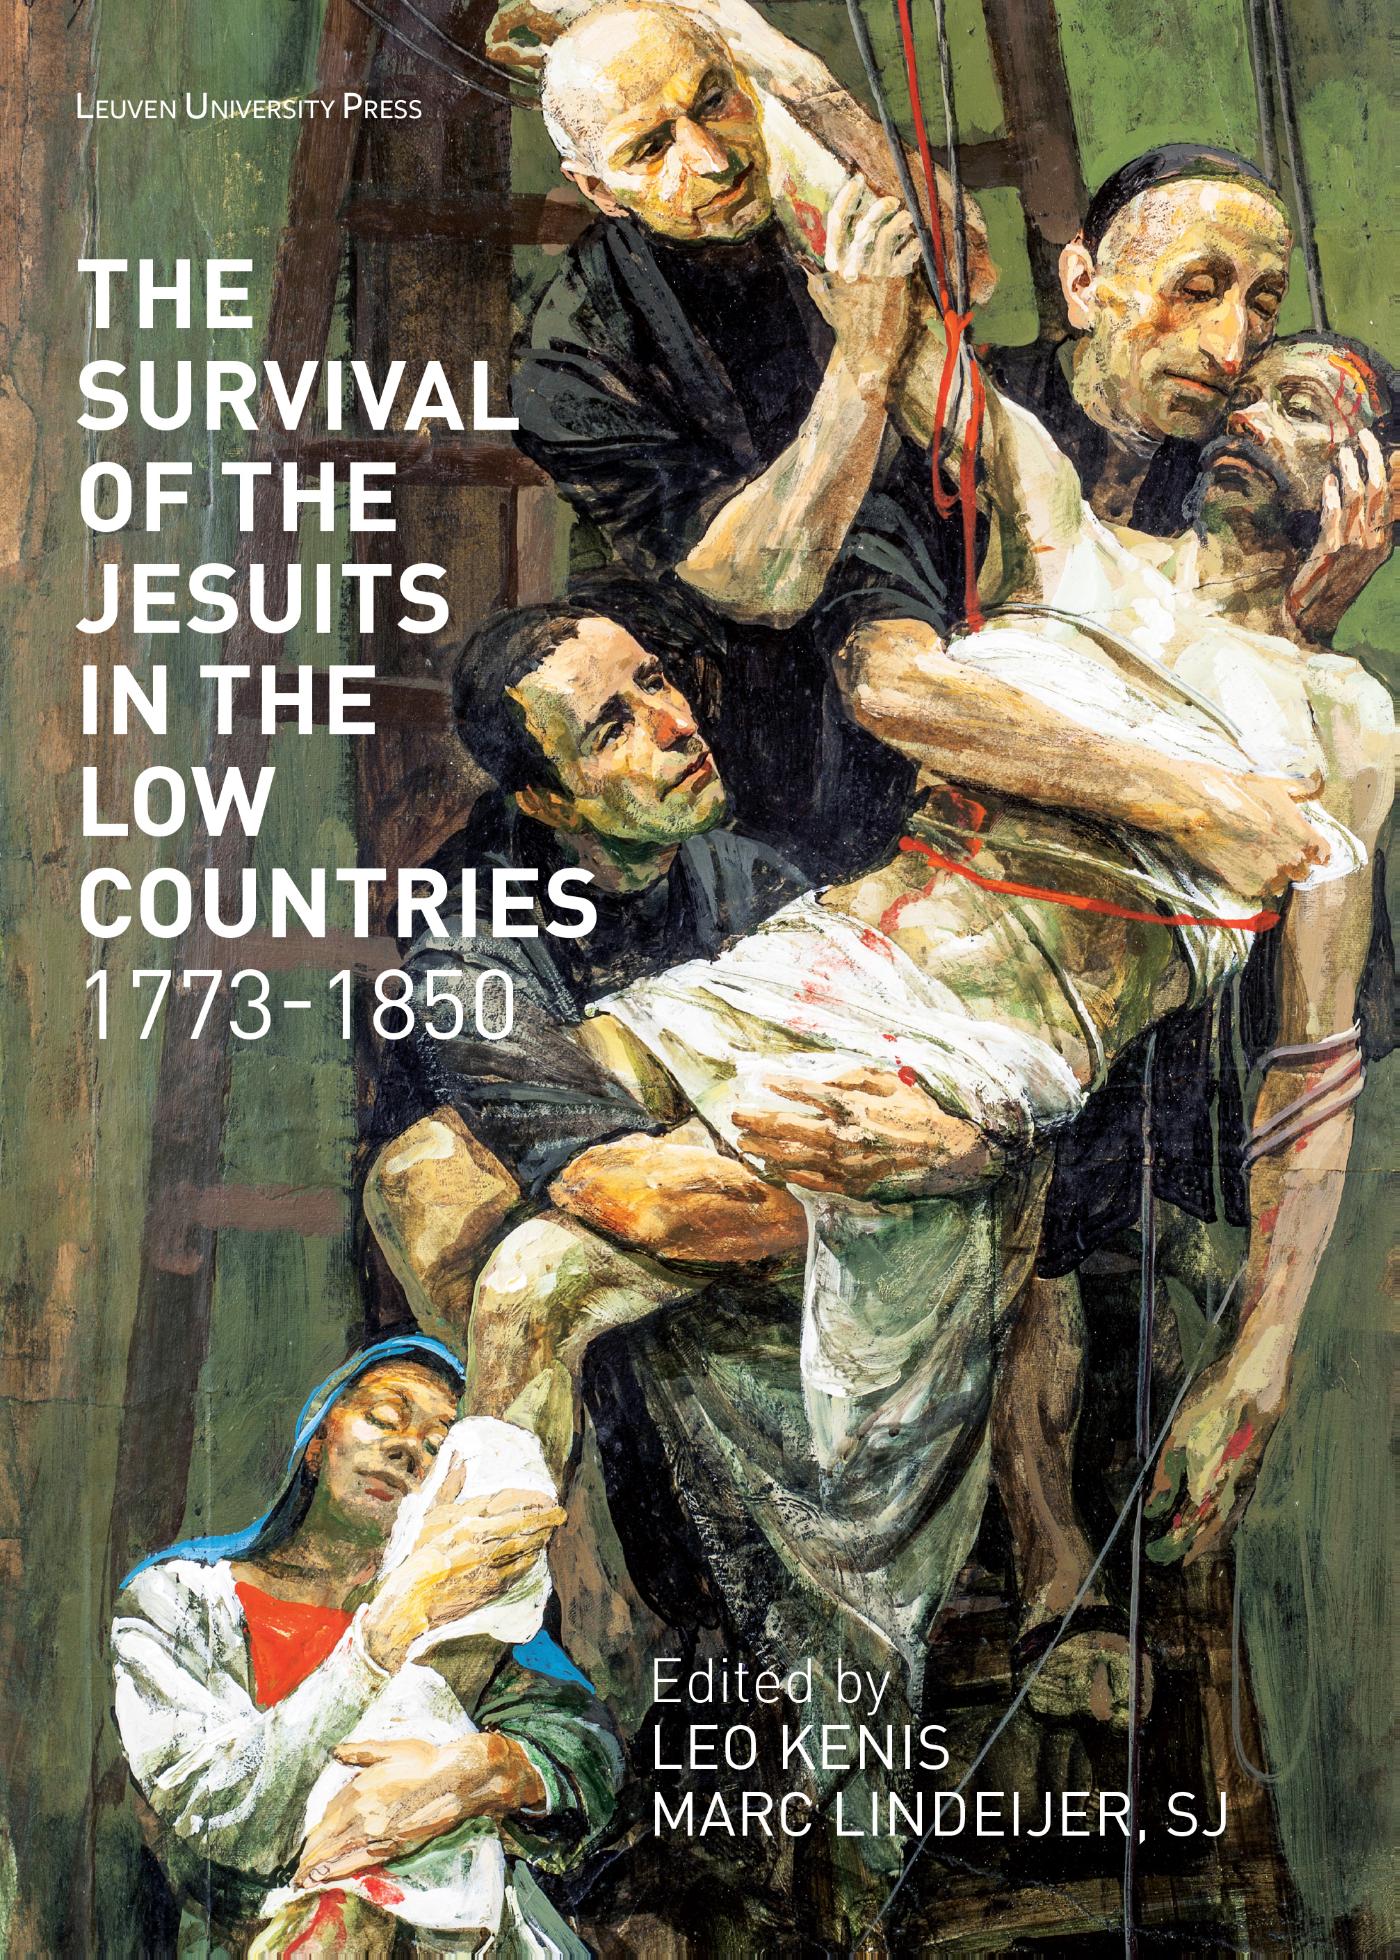 The Survival of the Jesuits in the Low Countries, 1773-1850 (Ebook)